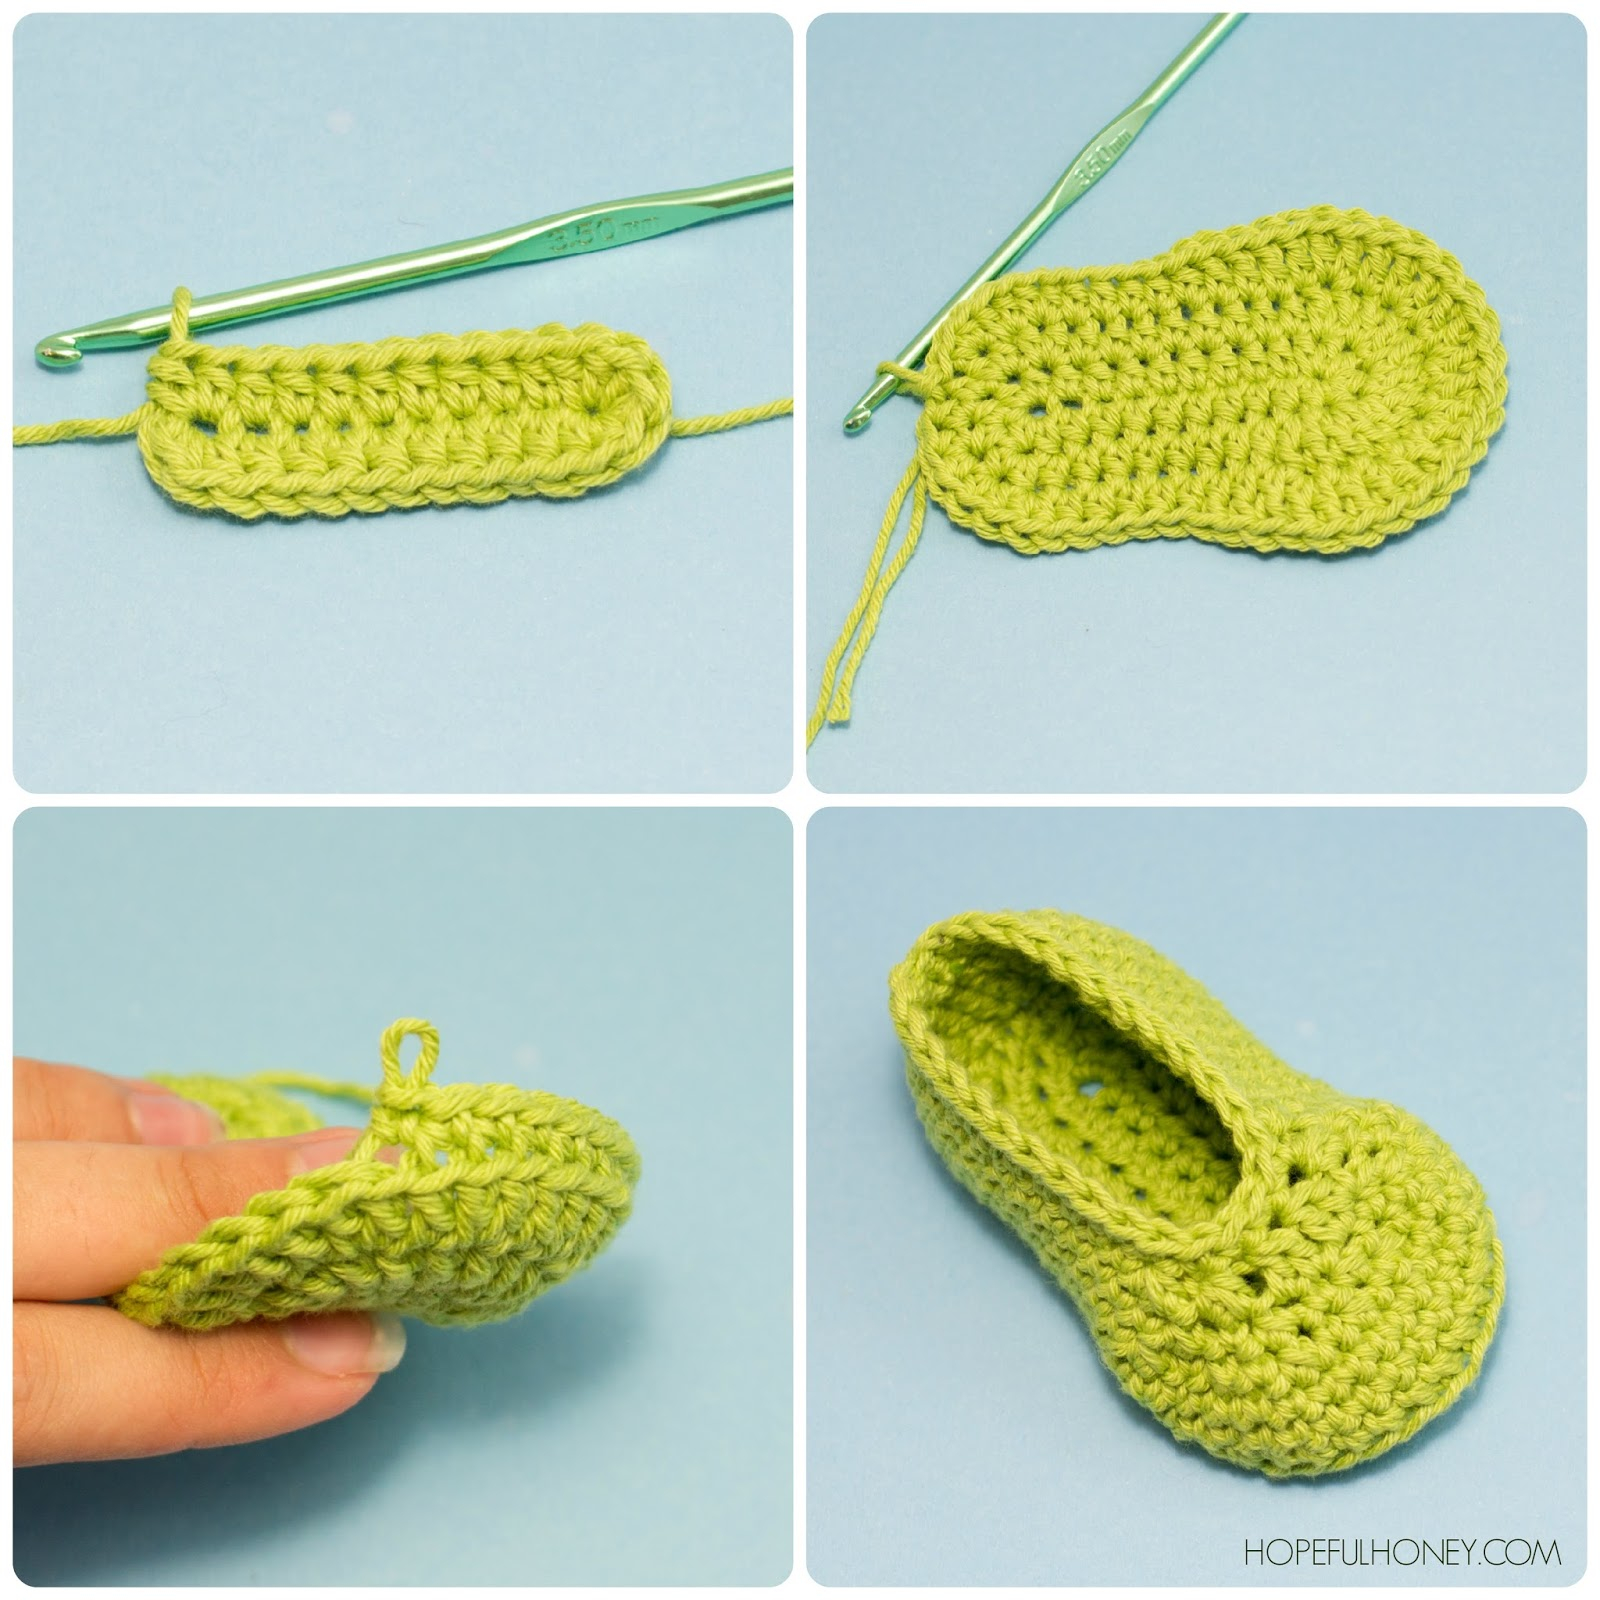 Crochet Pattern For Baby Booties Perfect Gift For Small Feet Ba Booties Crochet Pattern Crochet